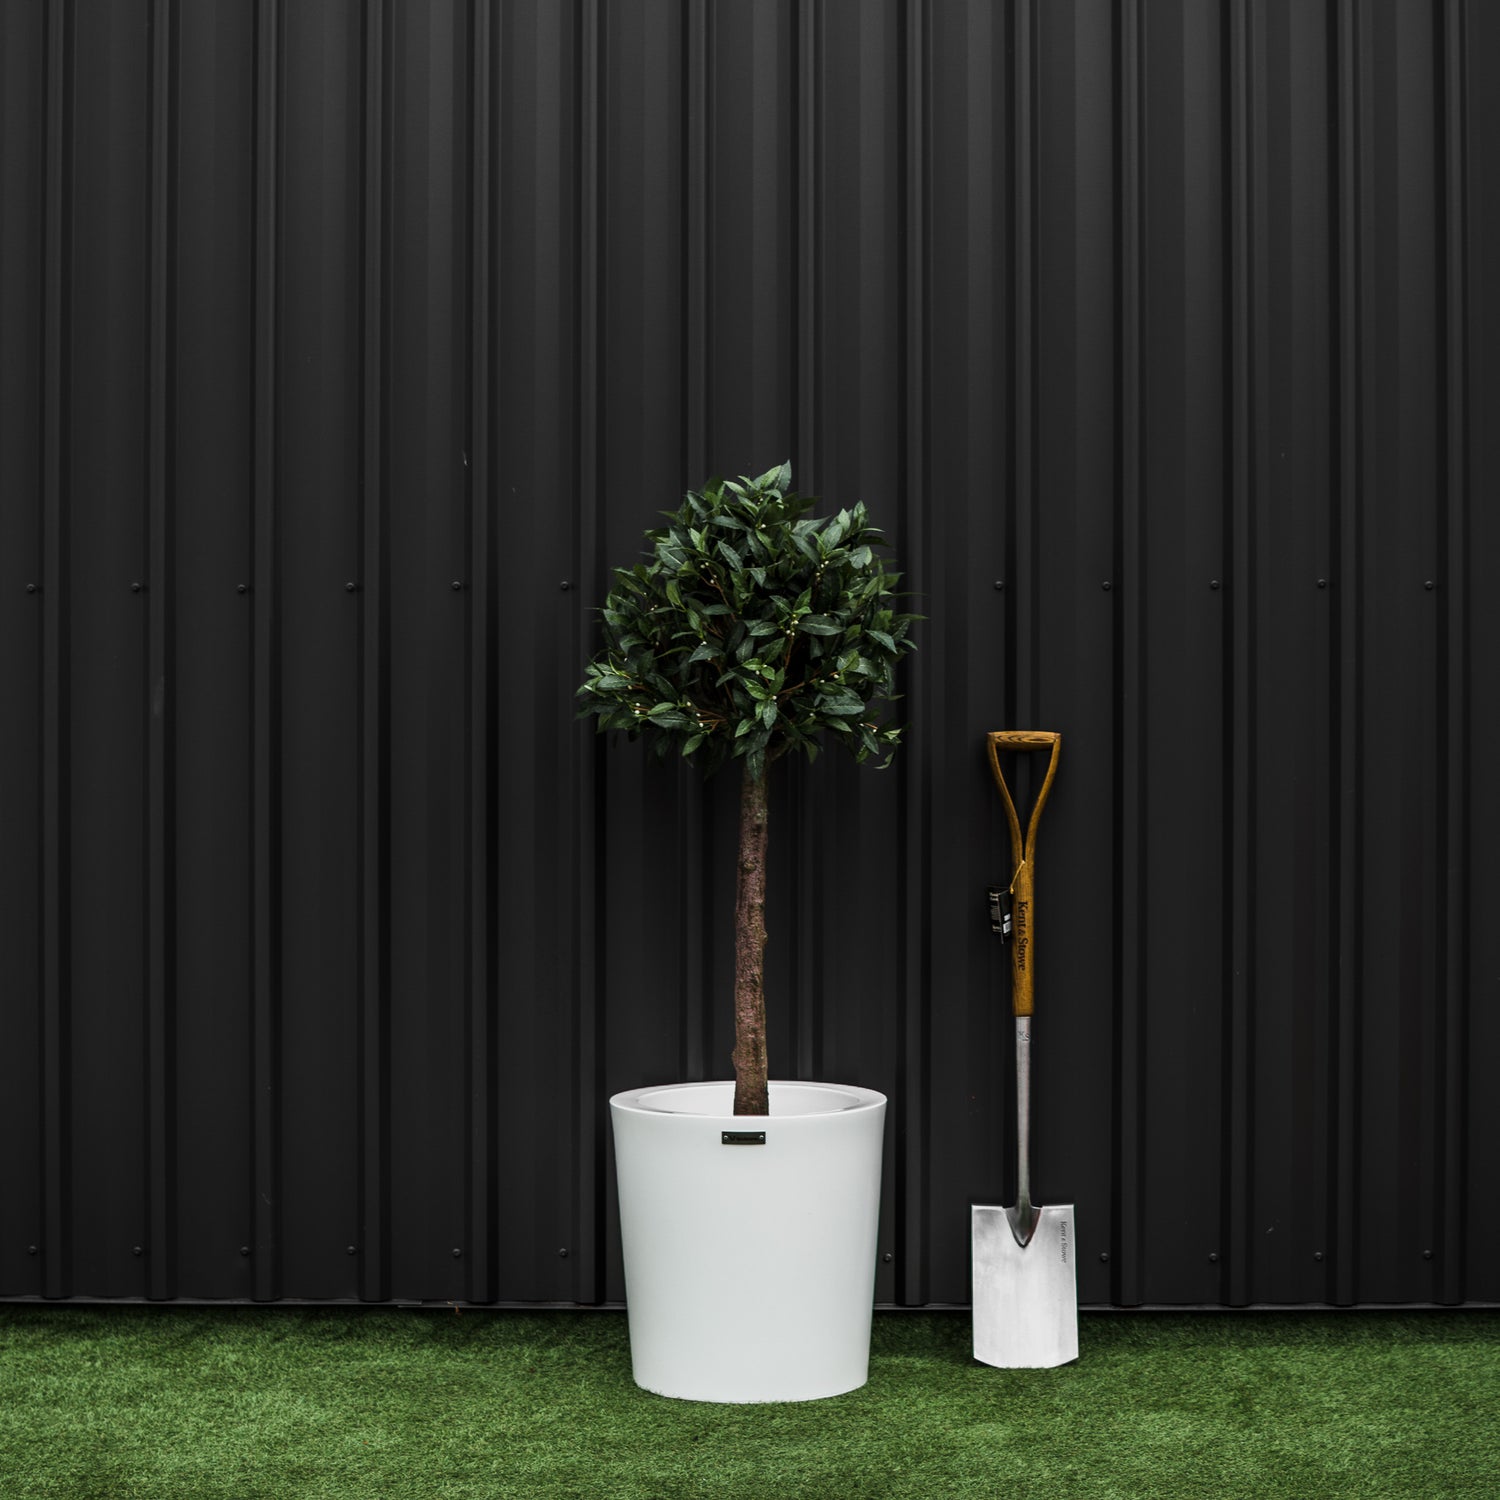 A white planter pot with a tree in it. The pot is beside a garden spade. Planter pots Australia.